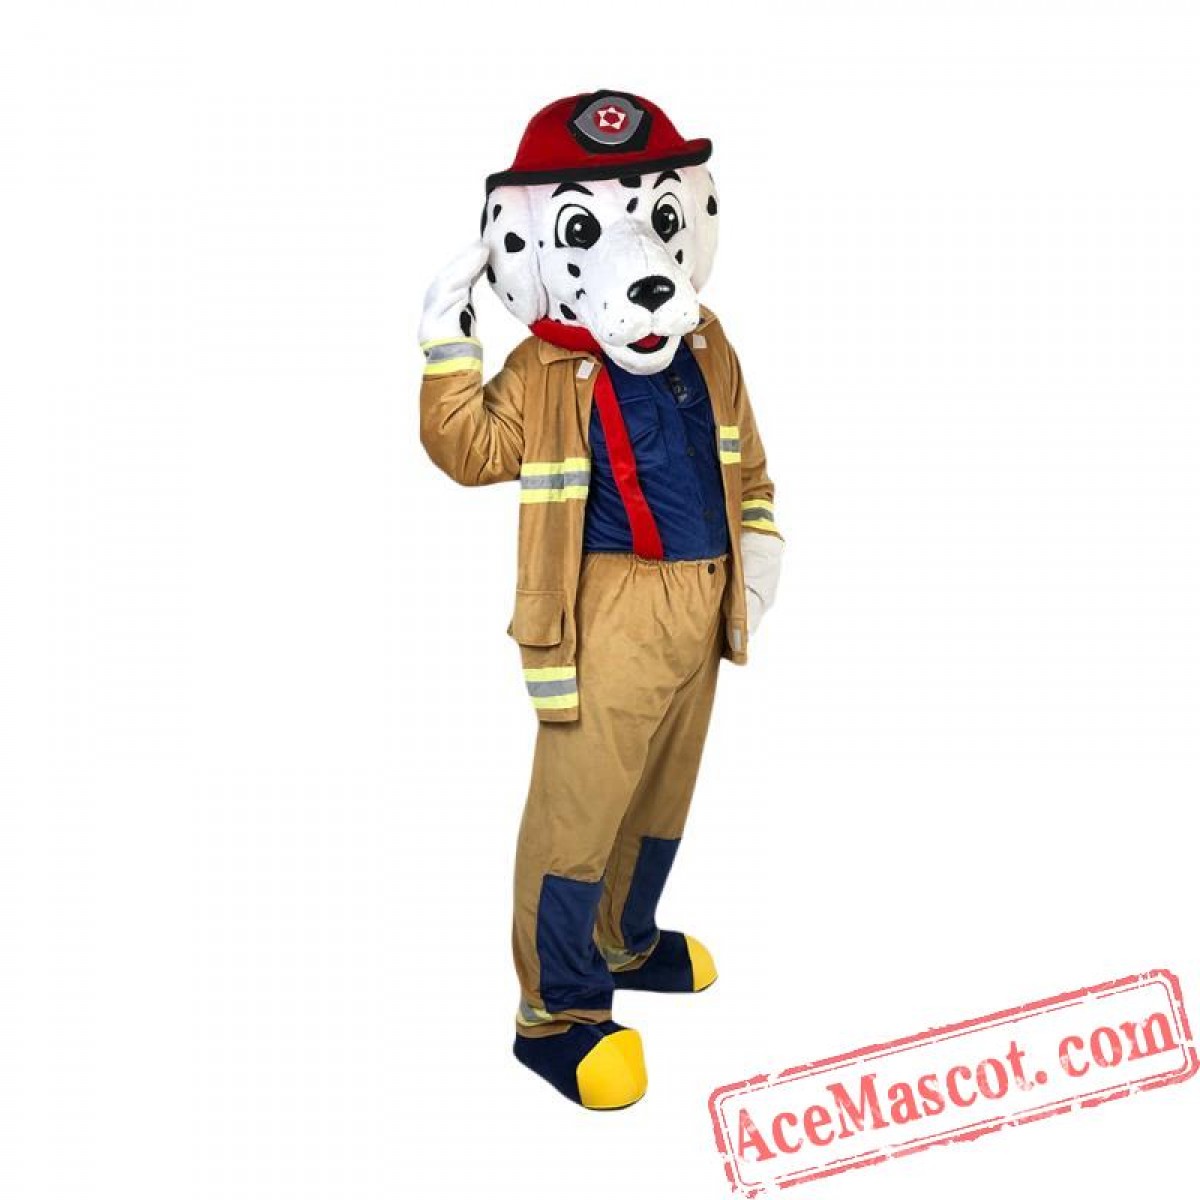 Sparky The Fire Dog Mascot Costume